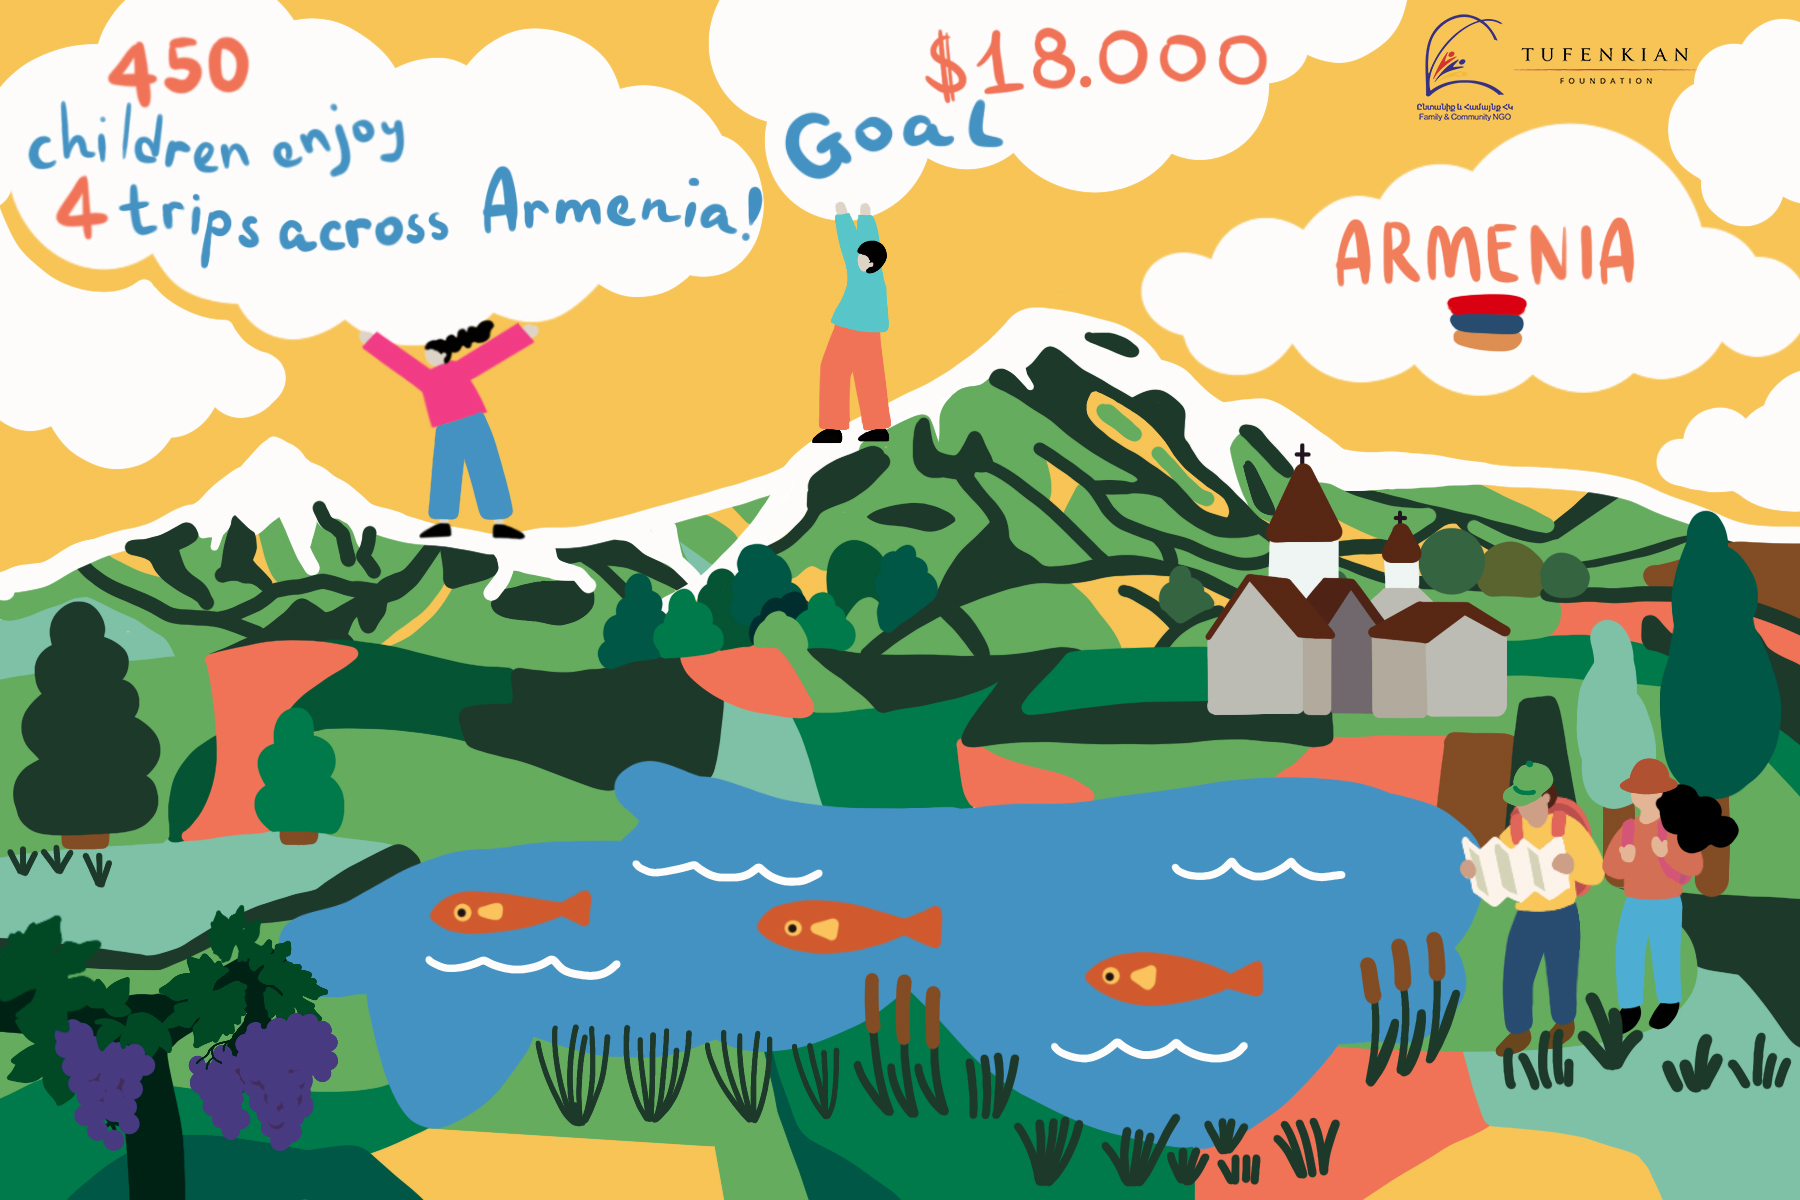 Giving vulnerable children the chance to experience Armenia outside of their own communities 